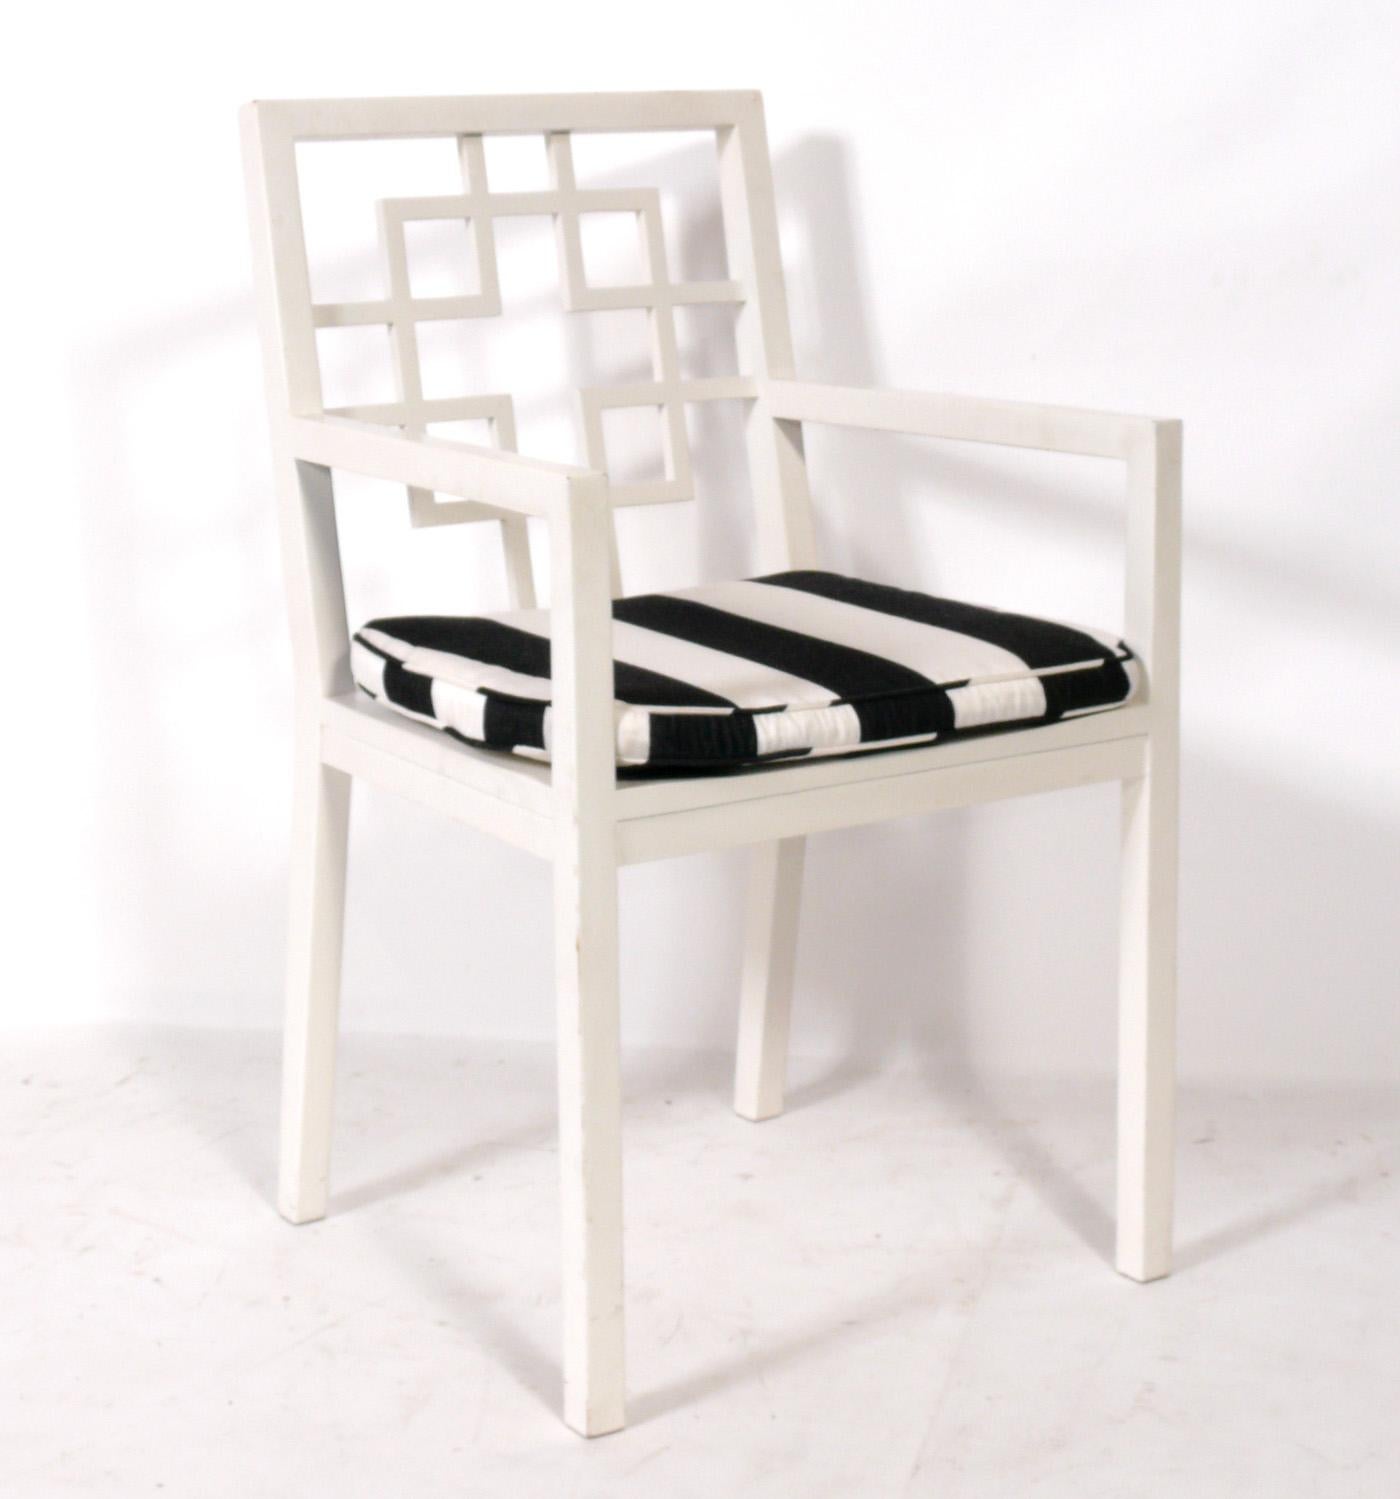 Set of Six Fretwork Back Dining or Lounge Chairs, American, circa 1990s. Elegant white painted finish and black and white striped cushions. 